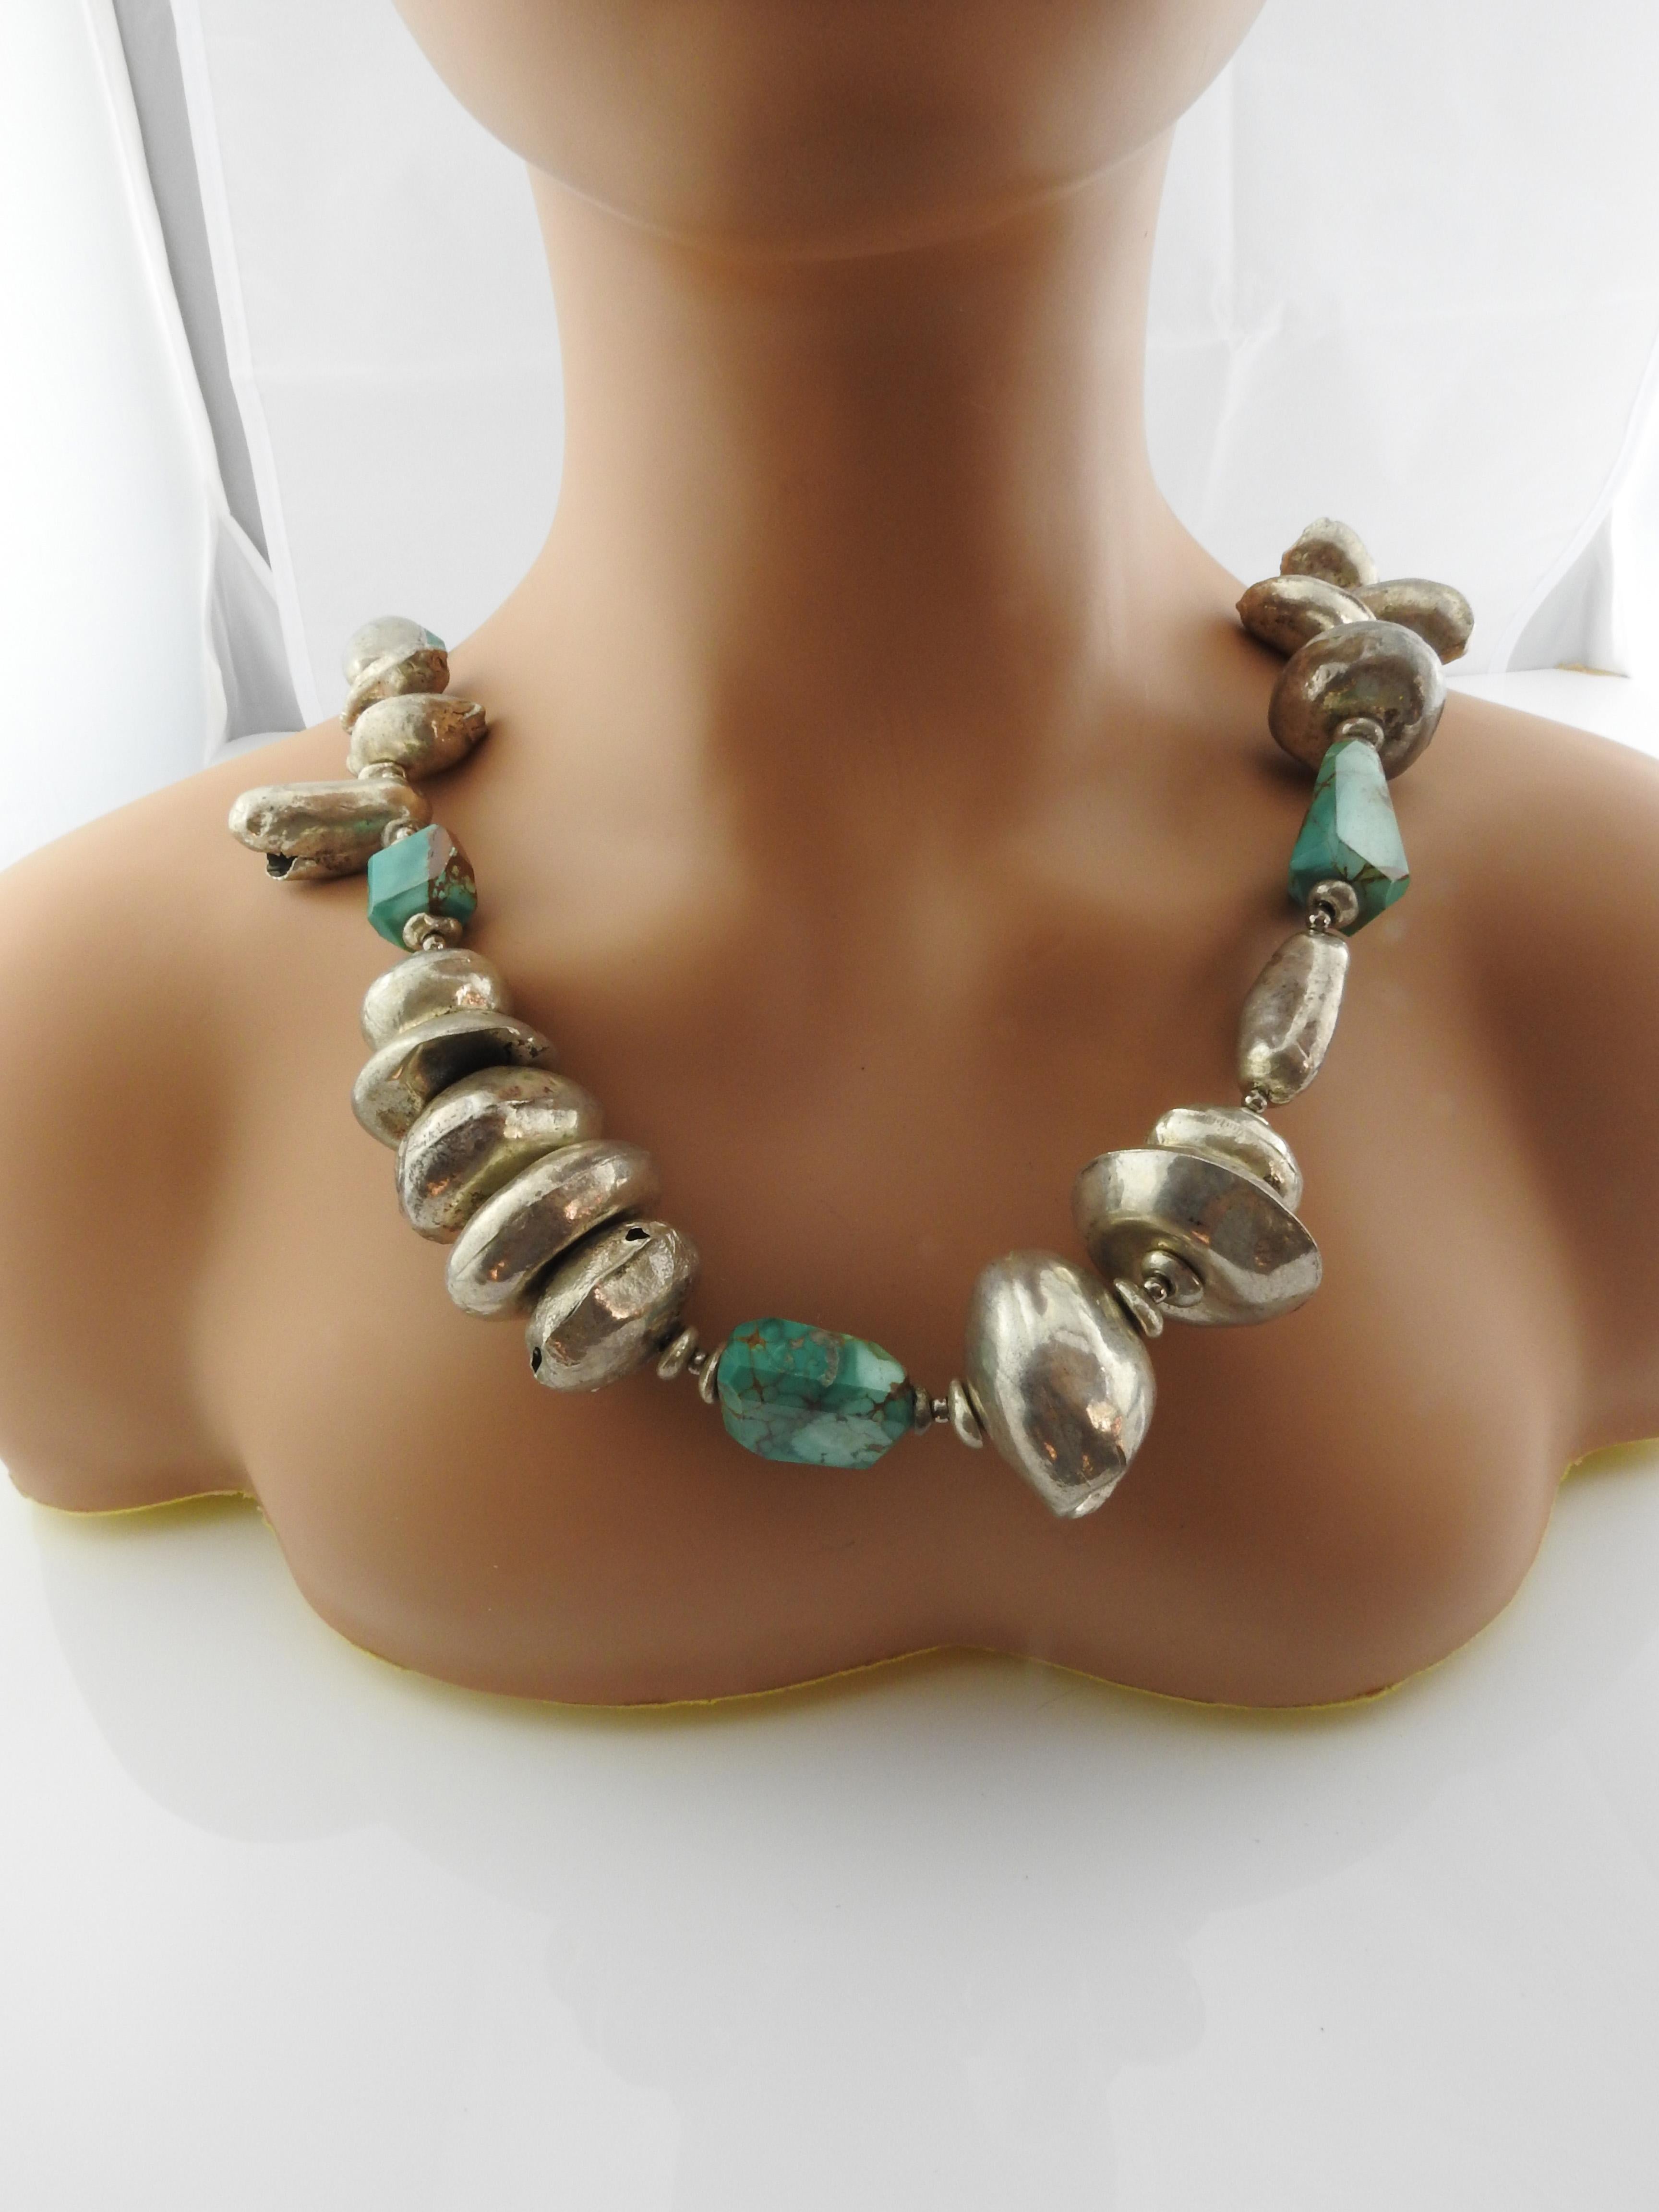 Handmade Native American Silver Puffy Hollow Bead and Turquoise Chunk Necklace In Good Condition For Sale In Washington Depot, CT